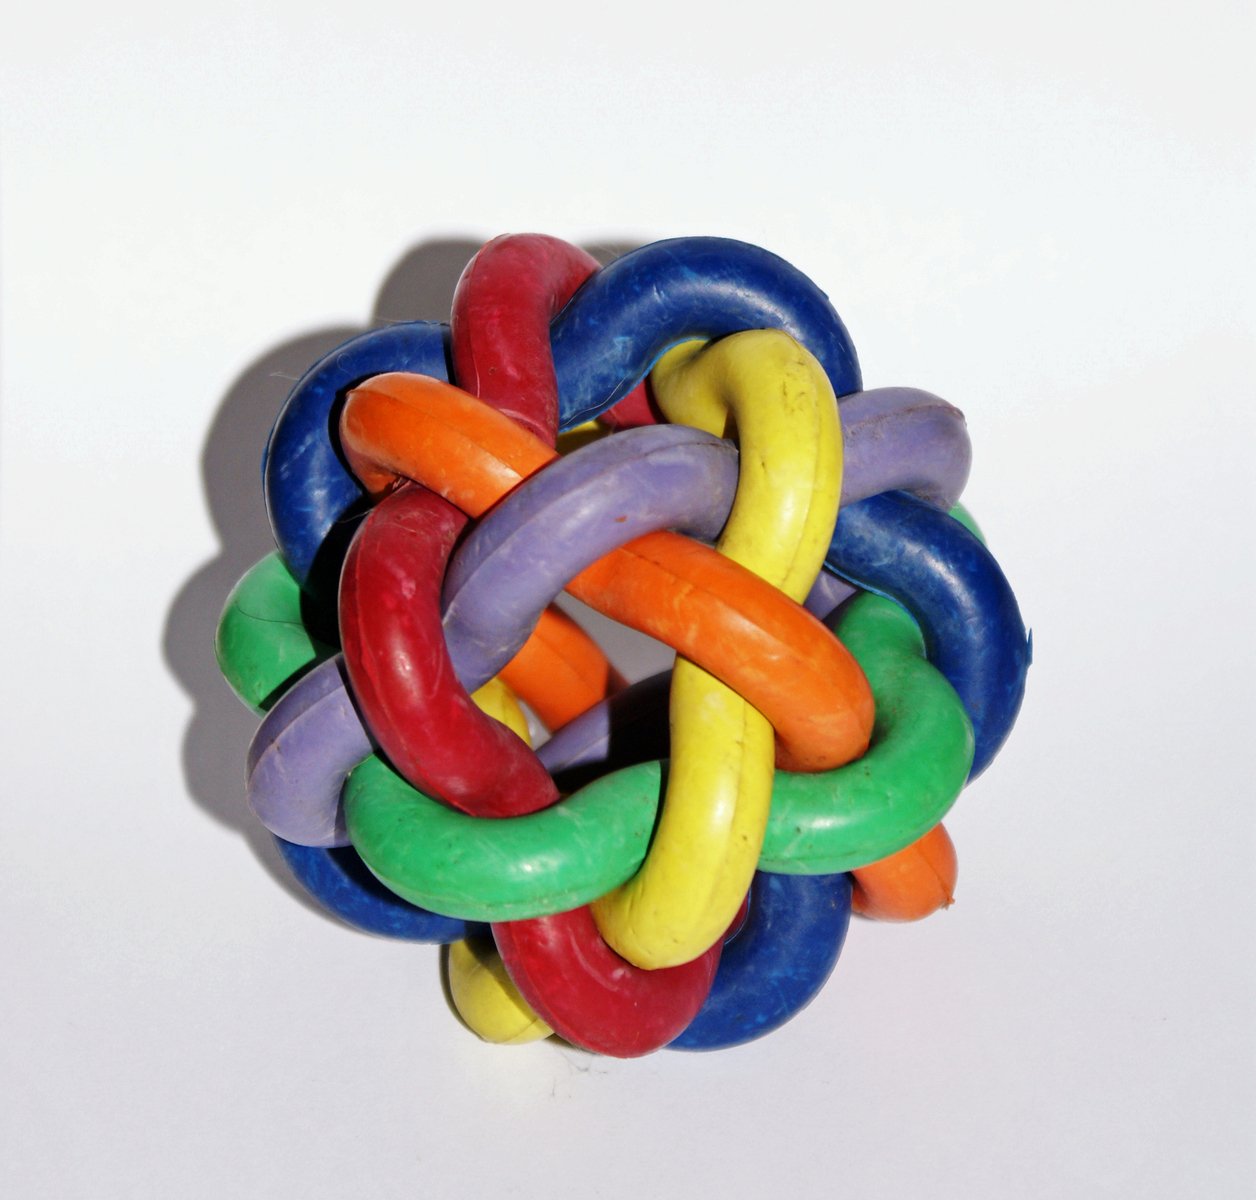 colorful toy rings arranged in the shape of an apple